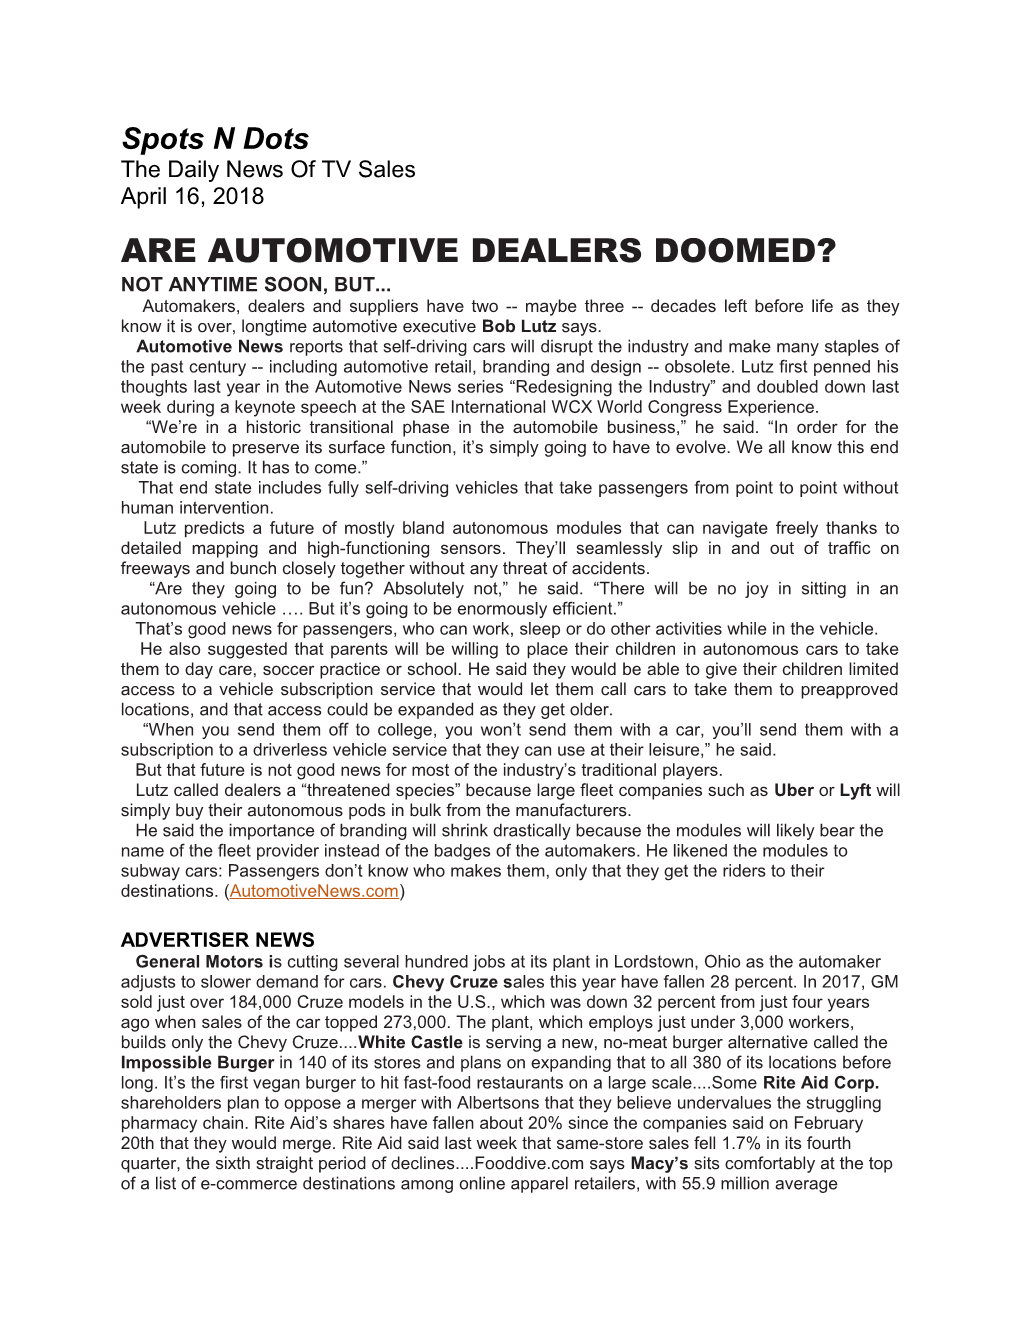 Are Automotive Dealers Doomed?